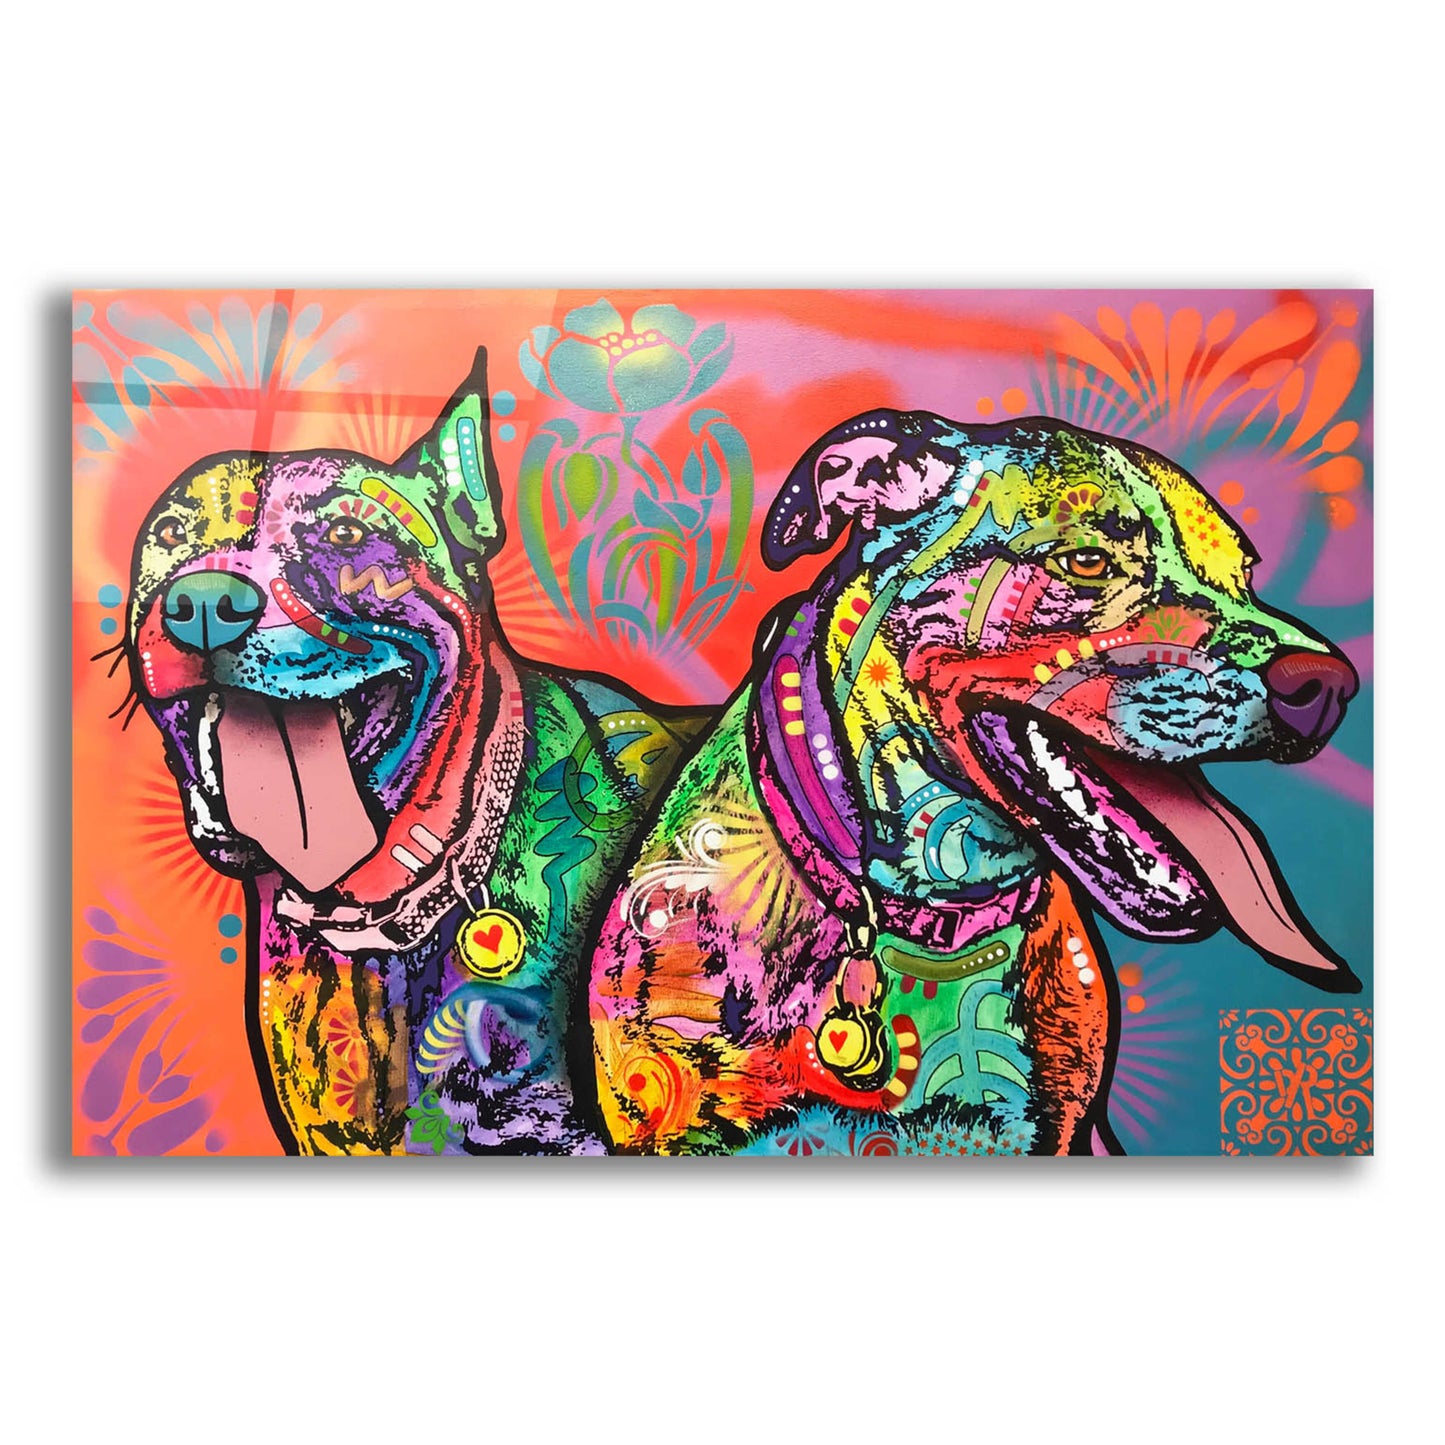 Epic Art 'Double the Fun' by Dean Russo, Acrylic Glass Wall Art,24x16